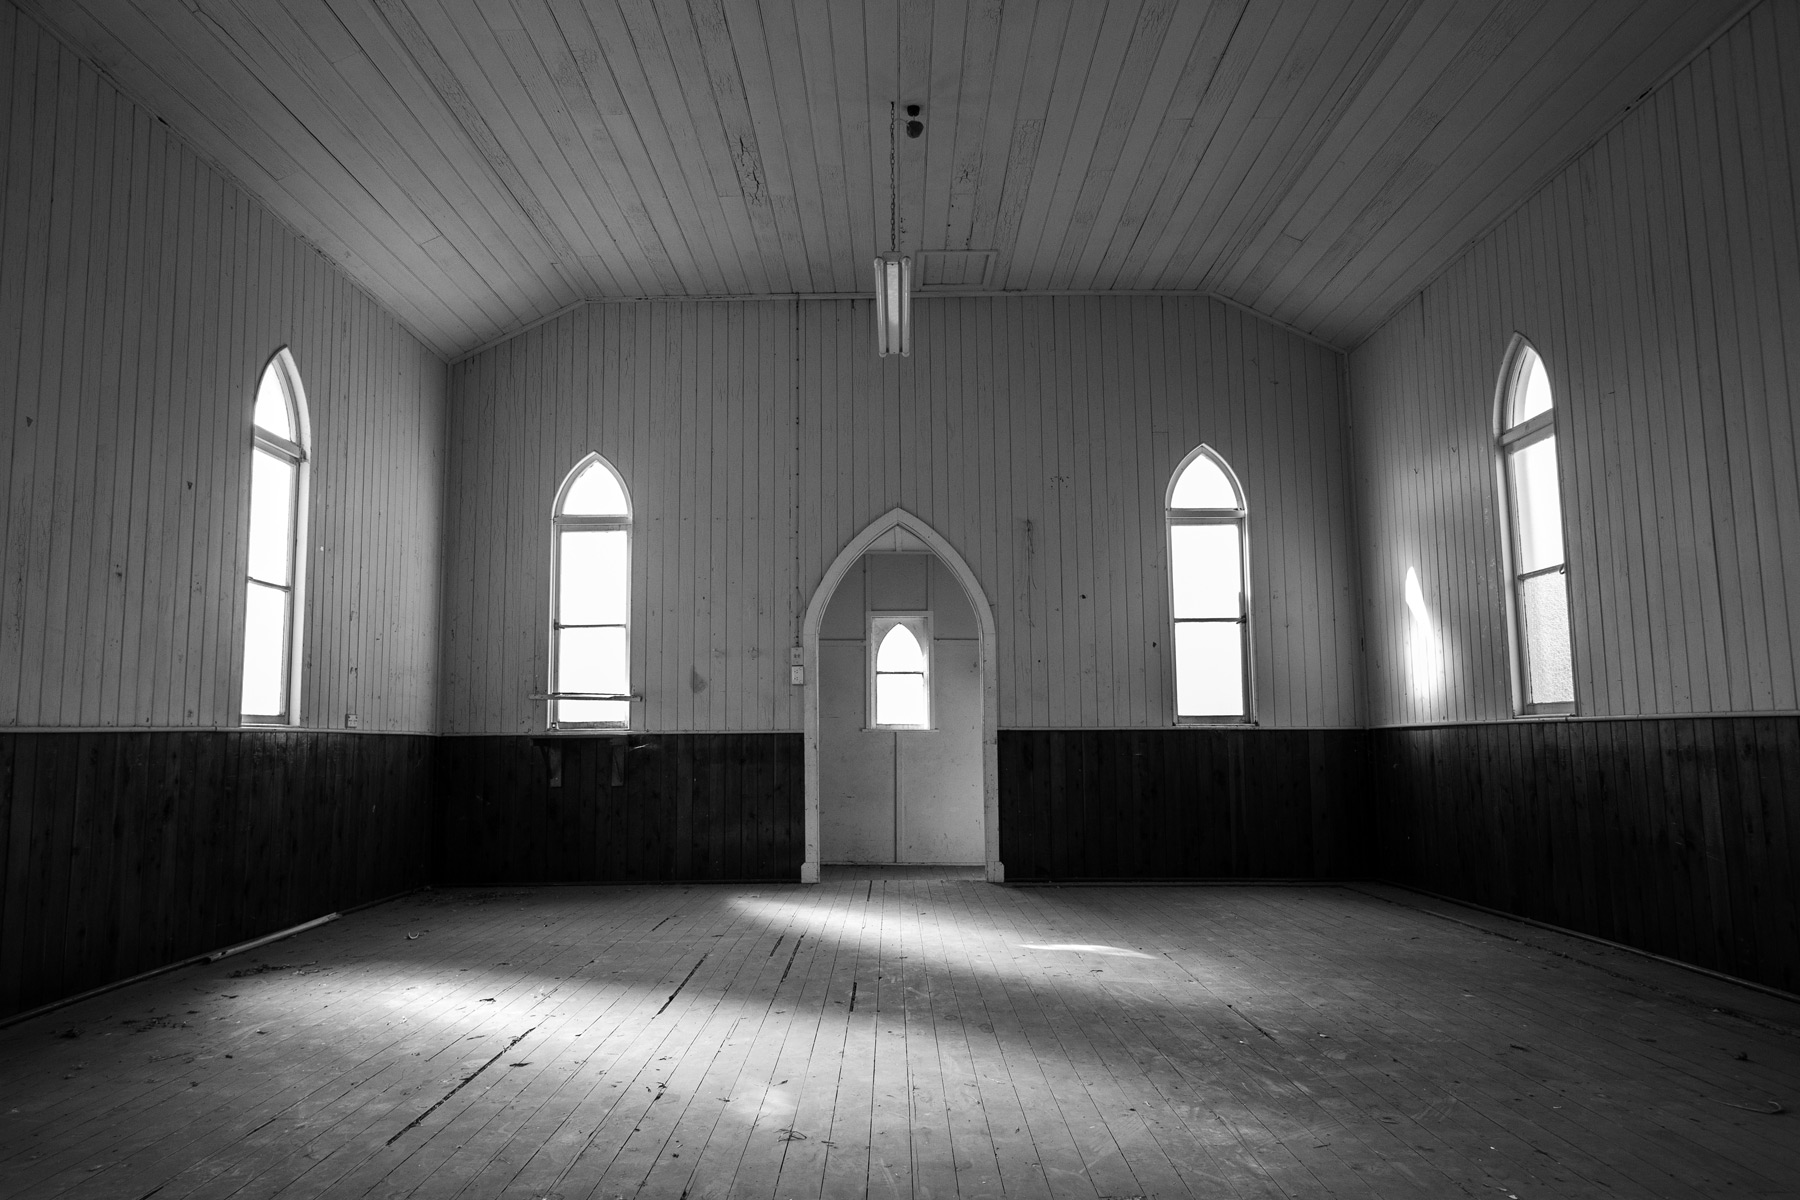 Inside an abandoned church in Acland